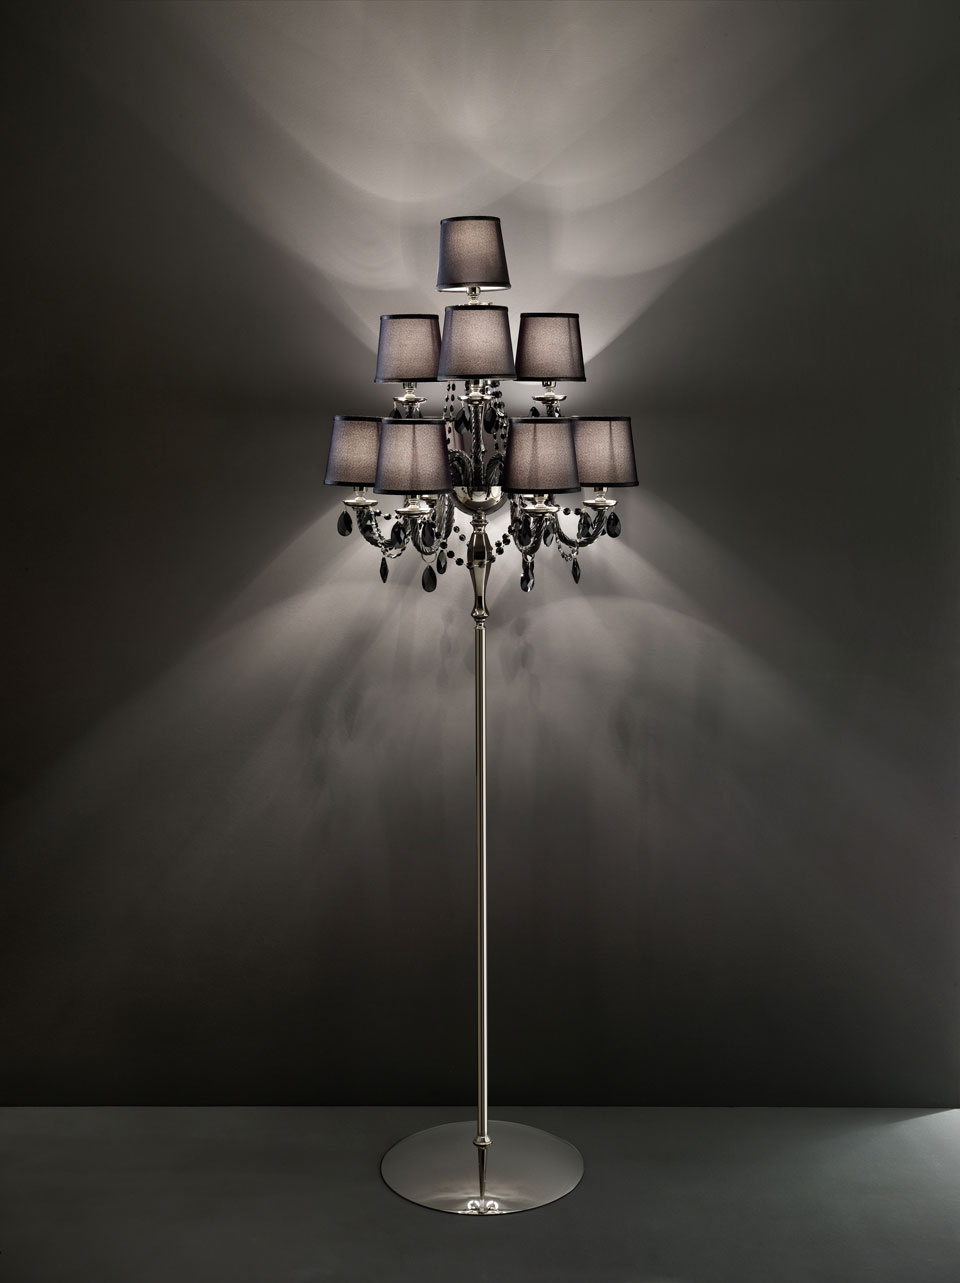 Black Floor Lamp In Glass And Swarovski, Floor Lamp With Crystal Drops